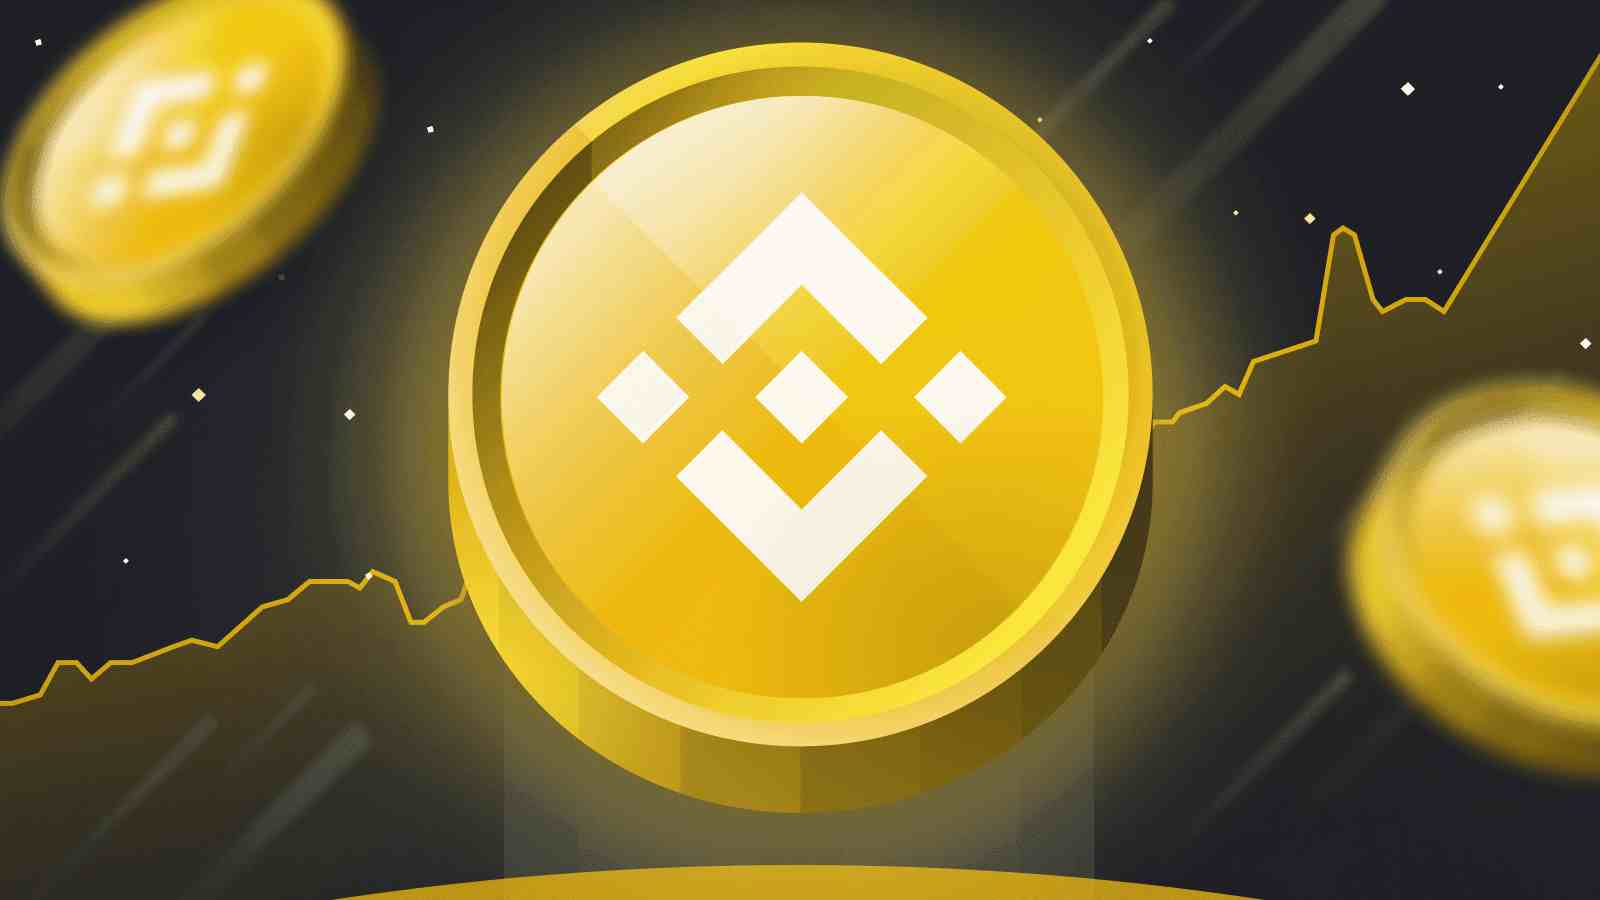 Withdraw Money From Binance to Bank Account